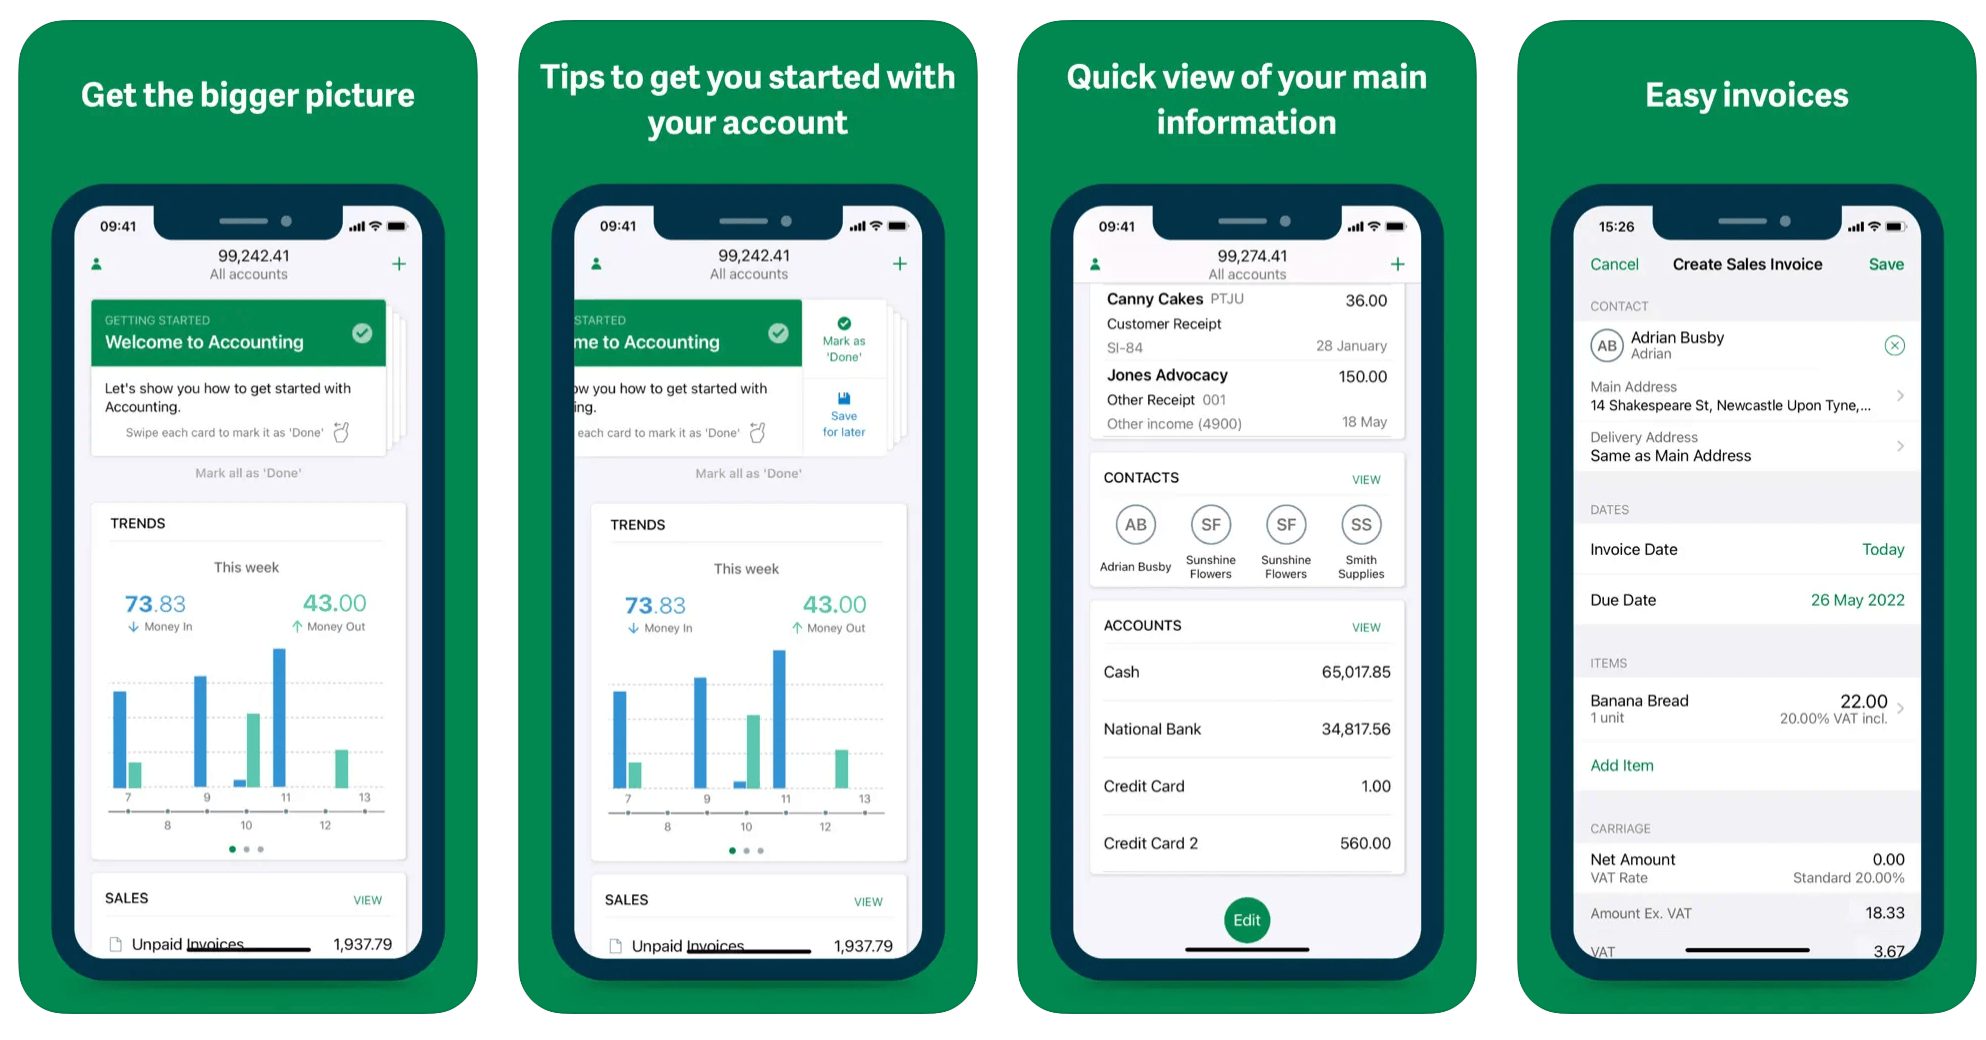 The iOS app for Sage